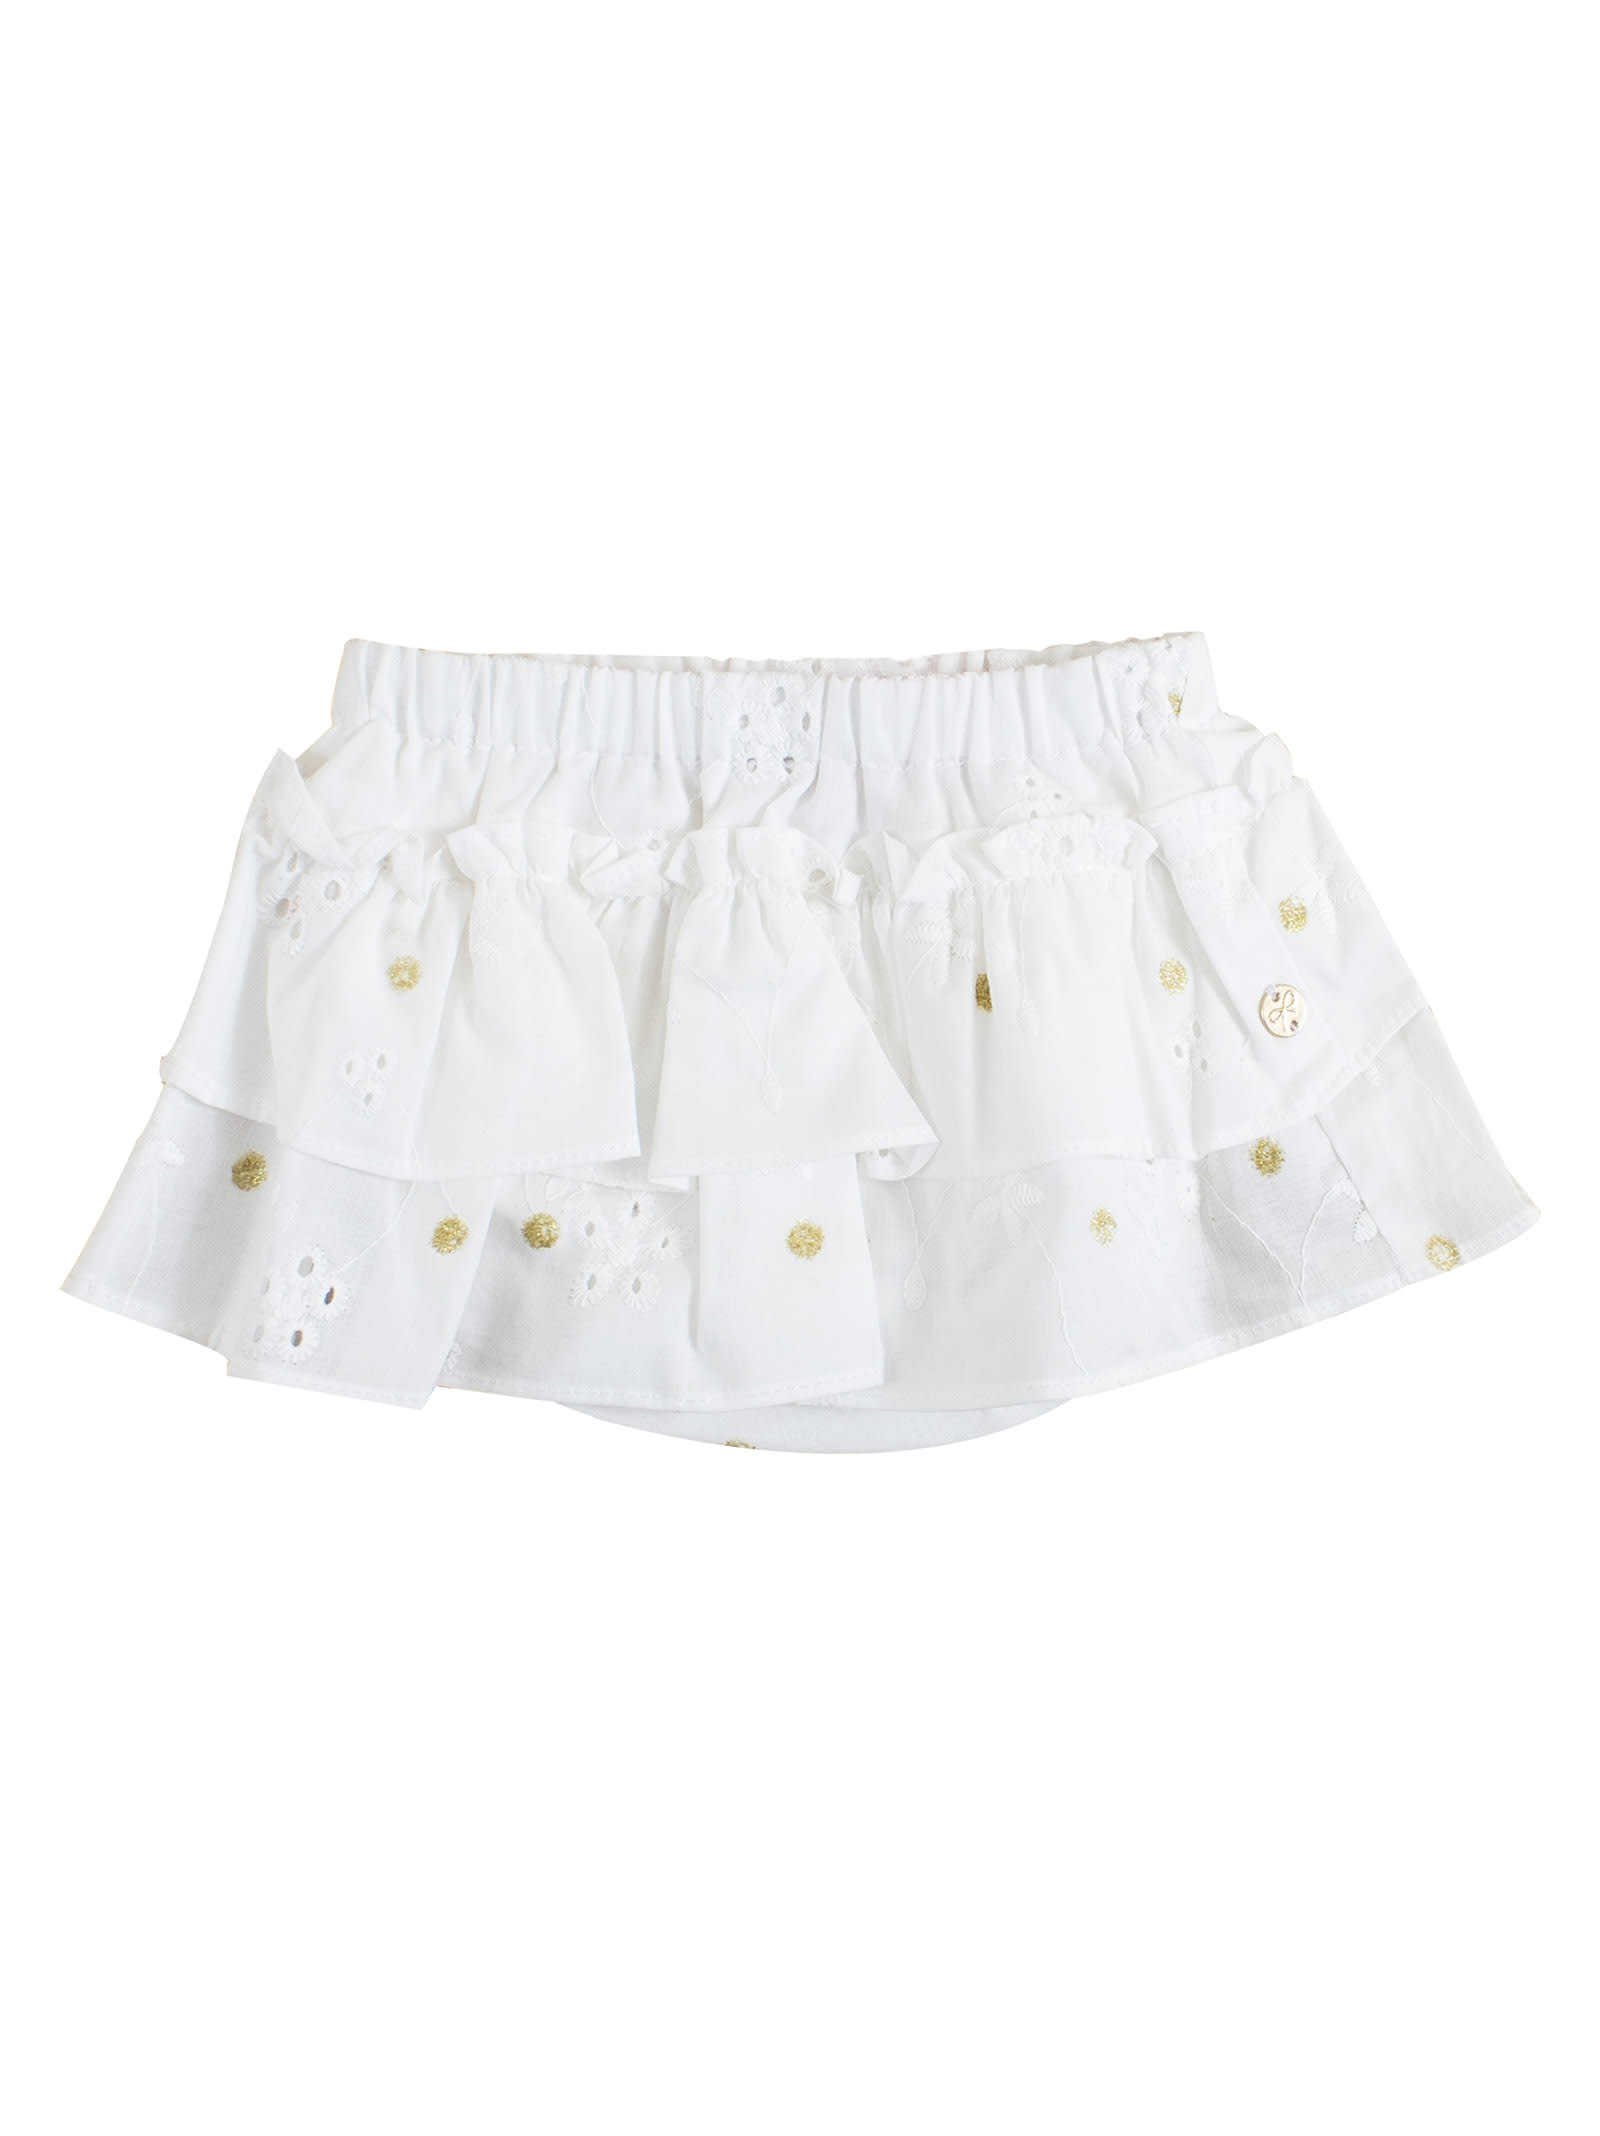 Lili Gaufrette Coulotte Newborn With Embroidery